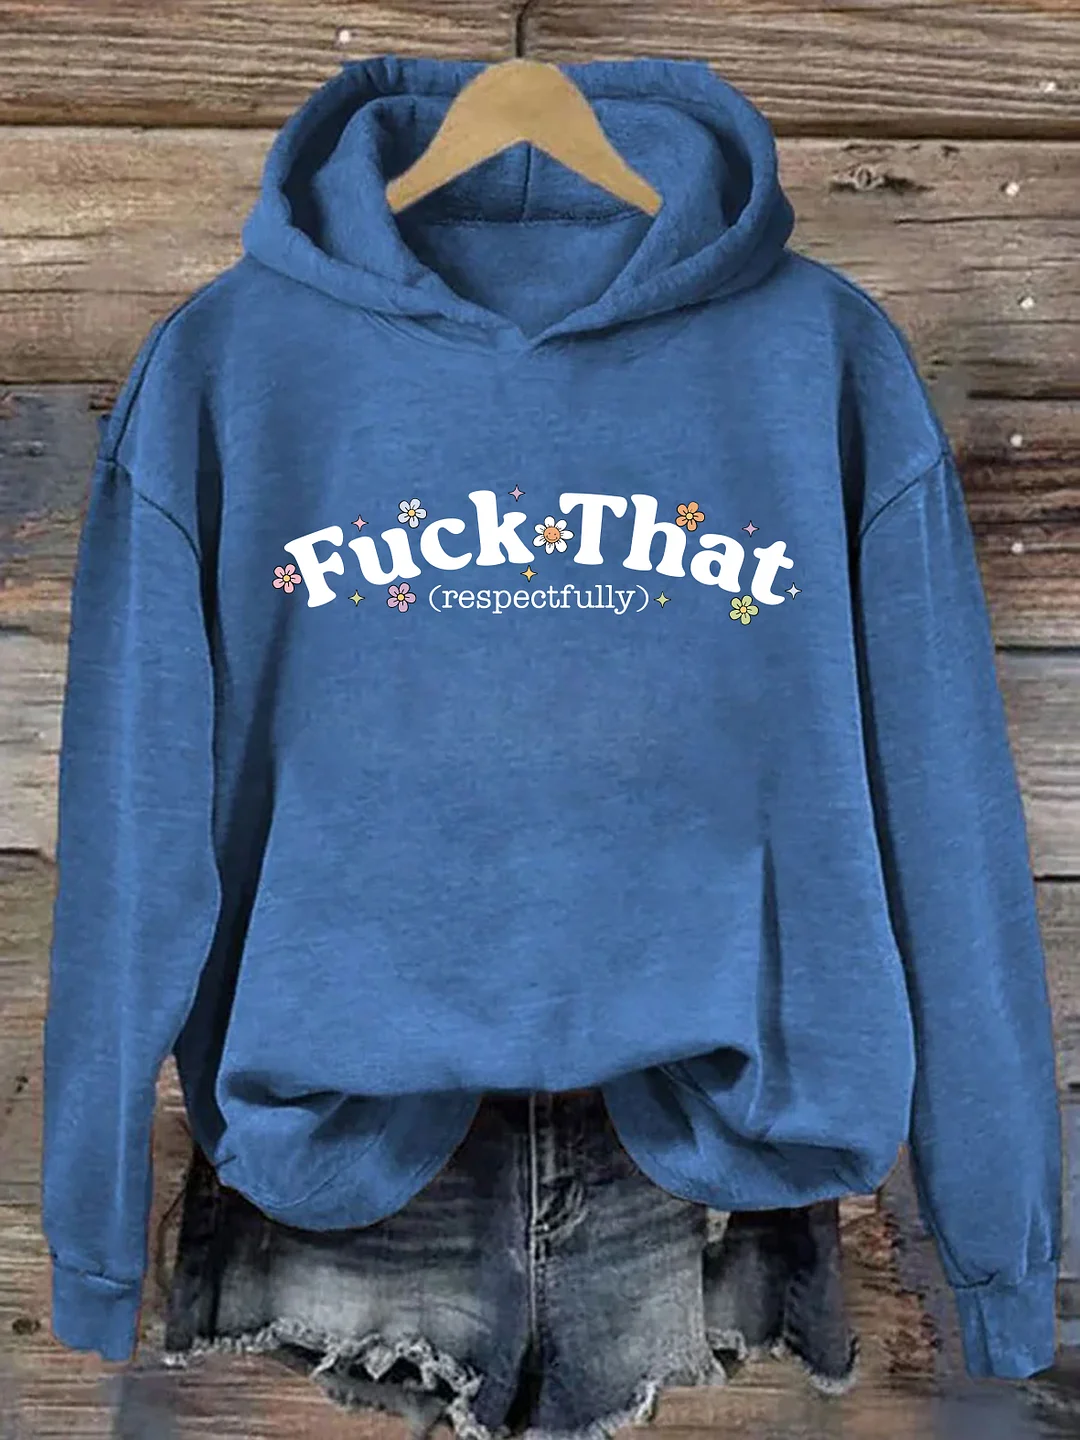 Sarcastic Fuck That Respectfully Hoodie